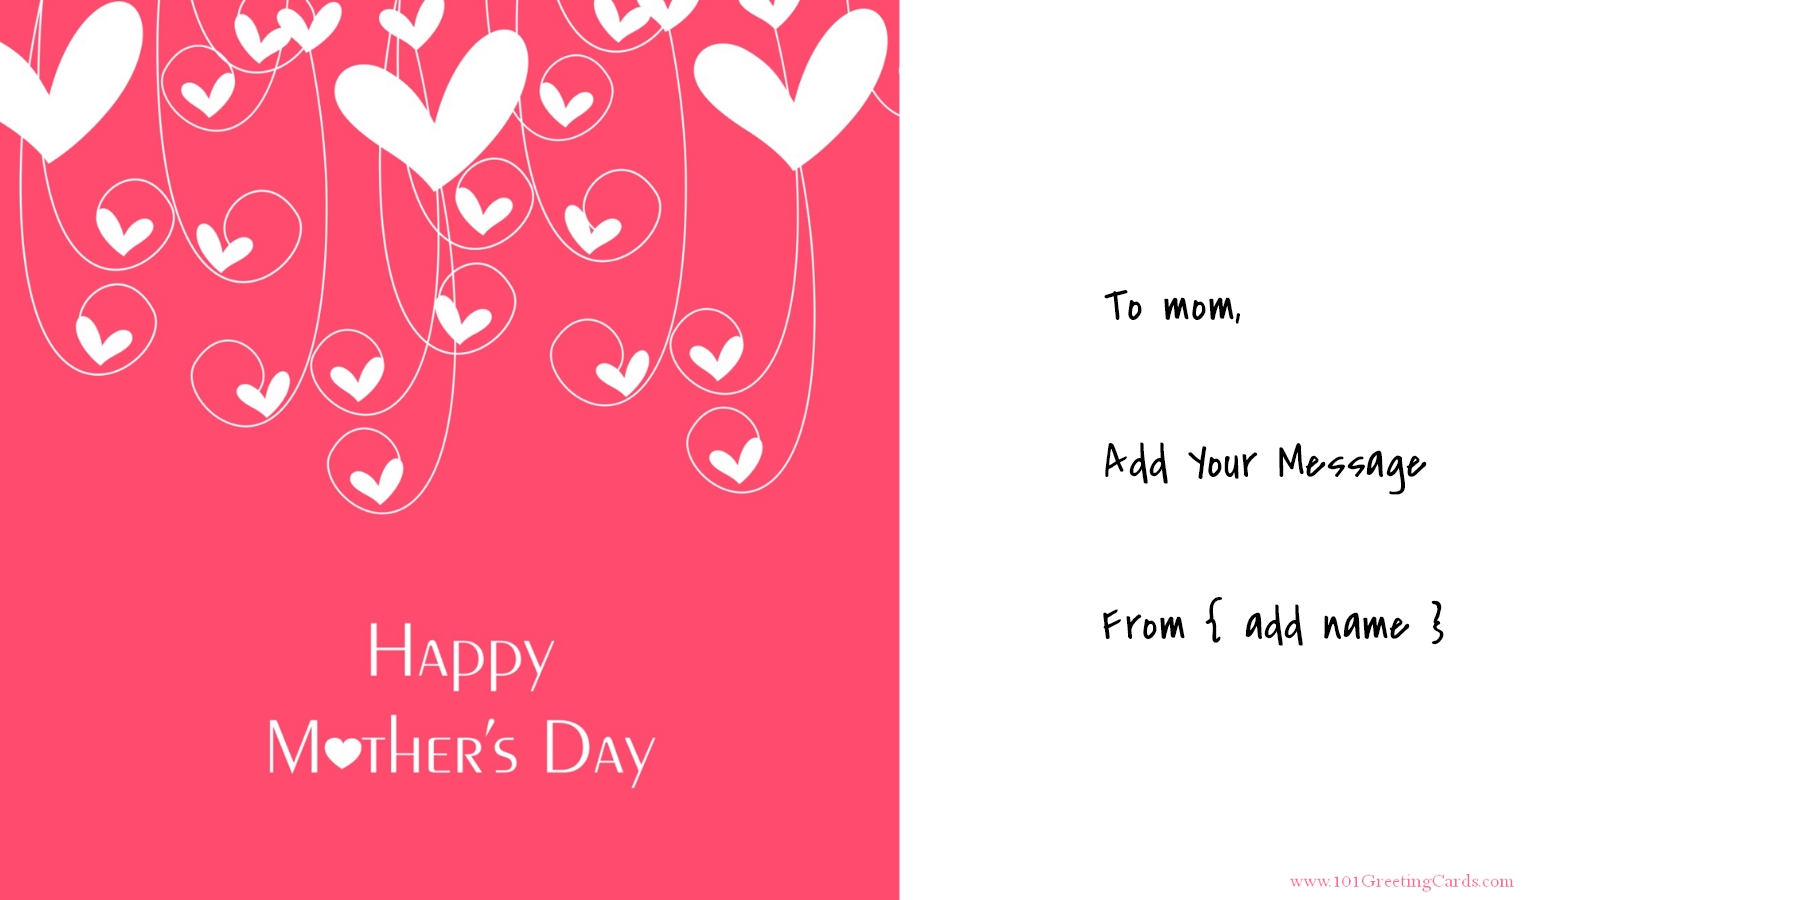 clipart mother day cards - photo #29